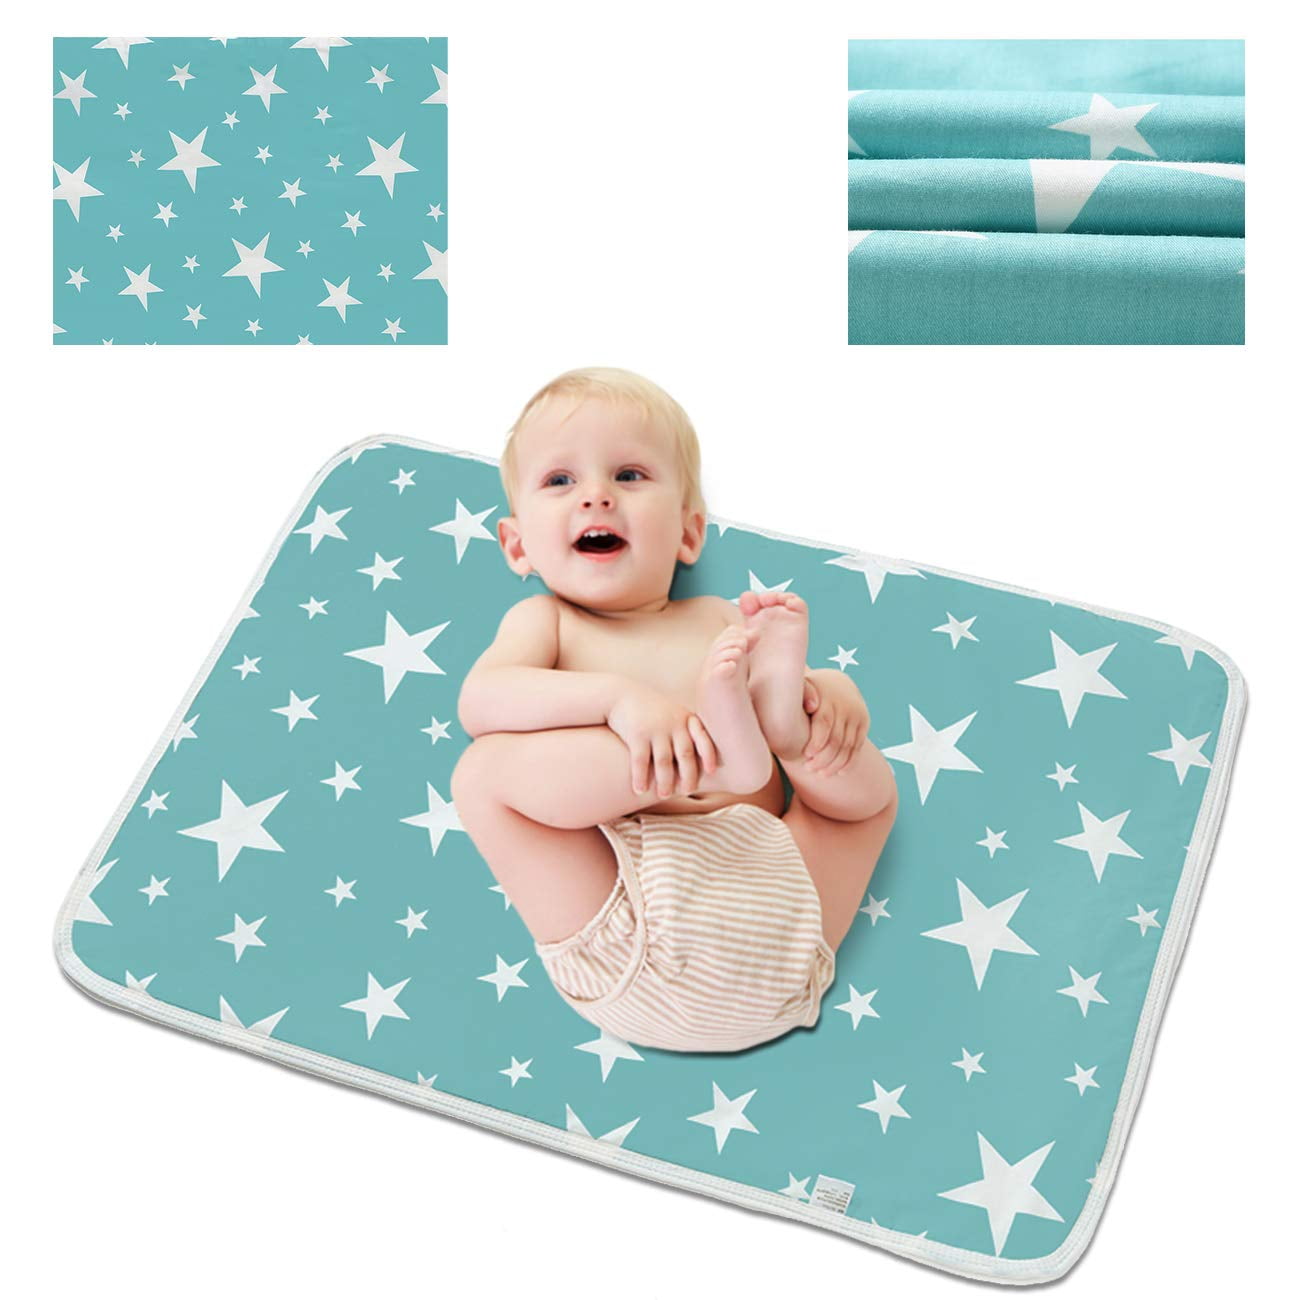 Portable Changing Mats Disposable Perfect Bed Baby Pads Waterproof Babies Mat 